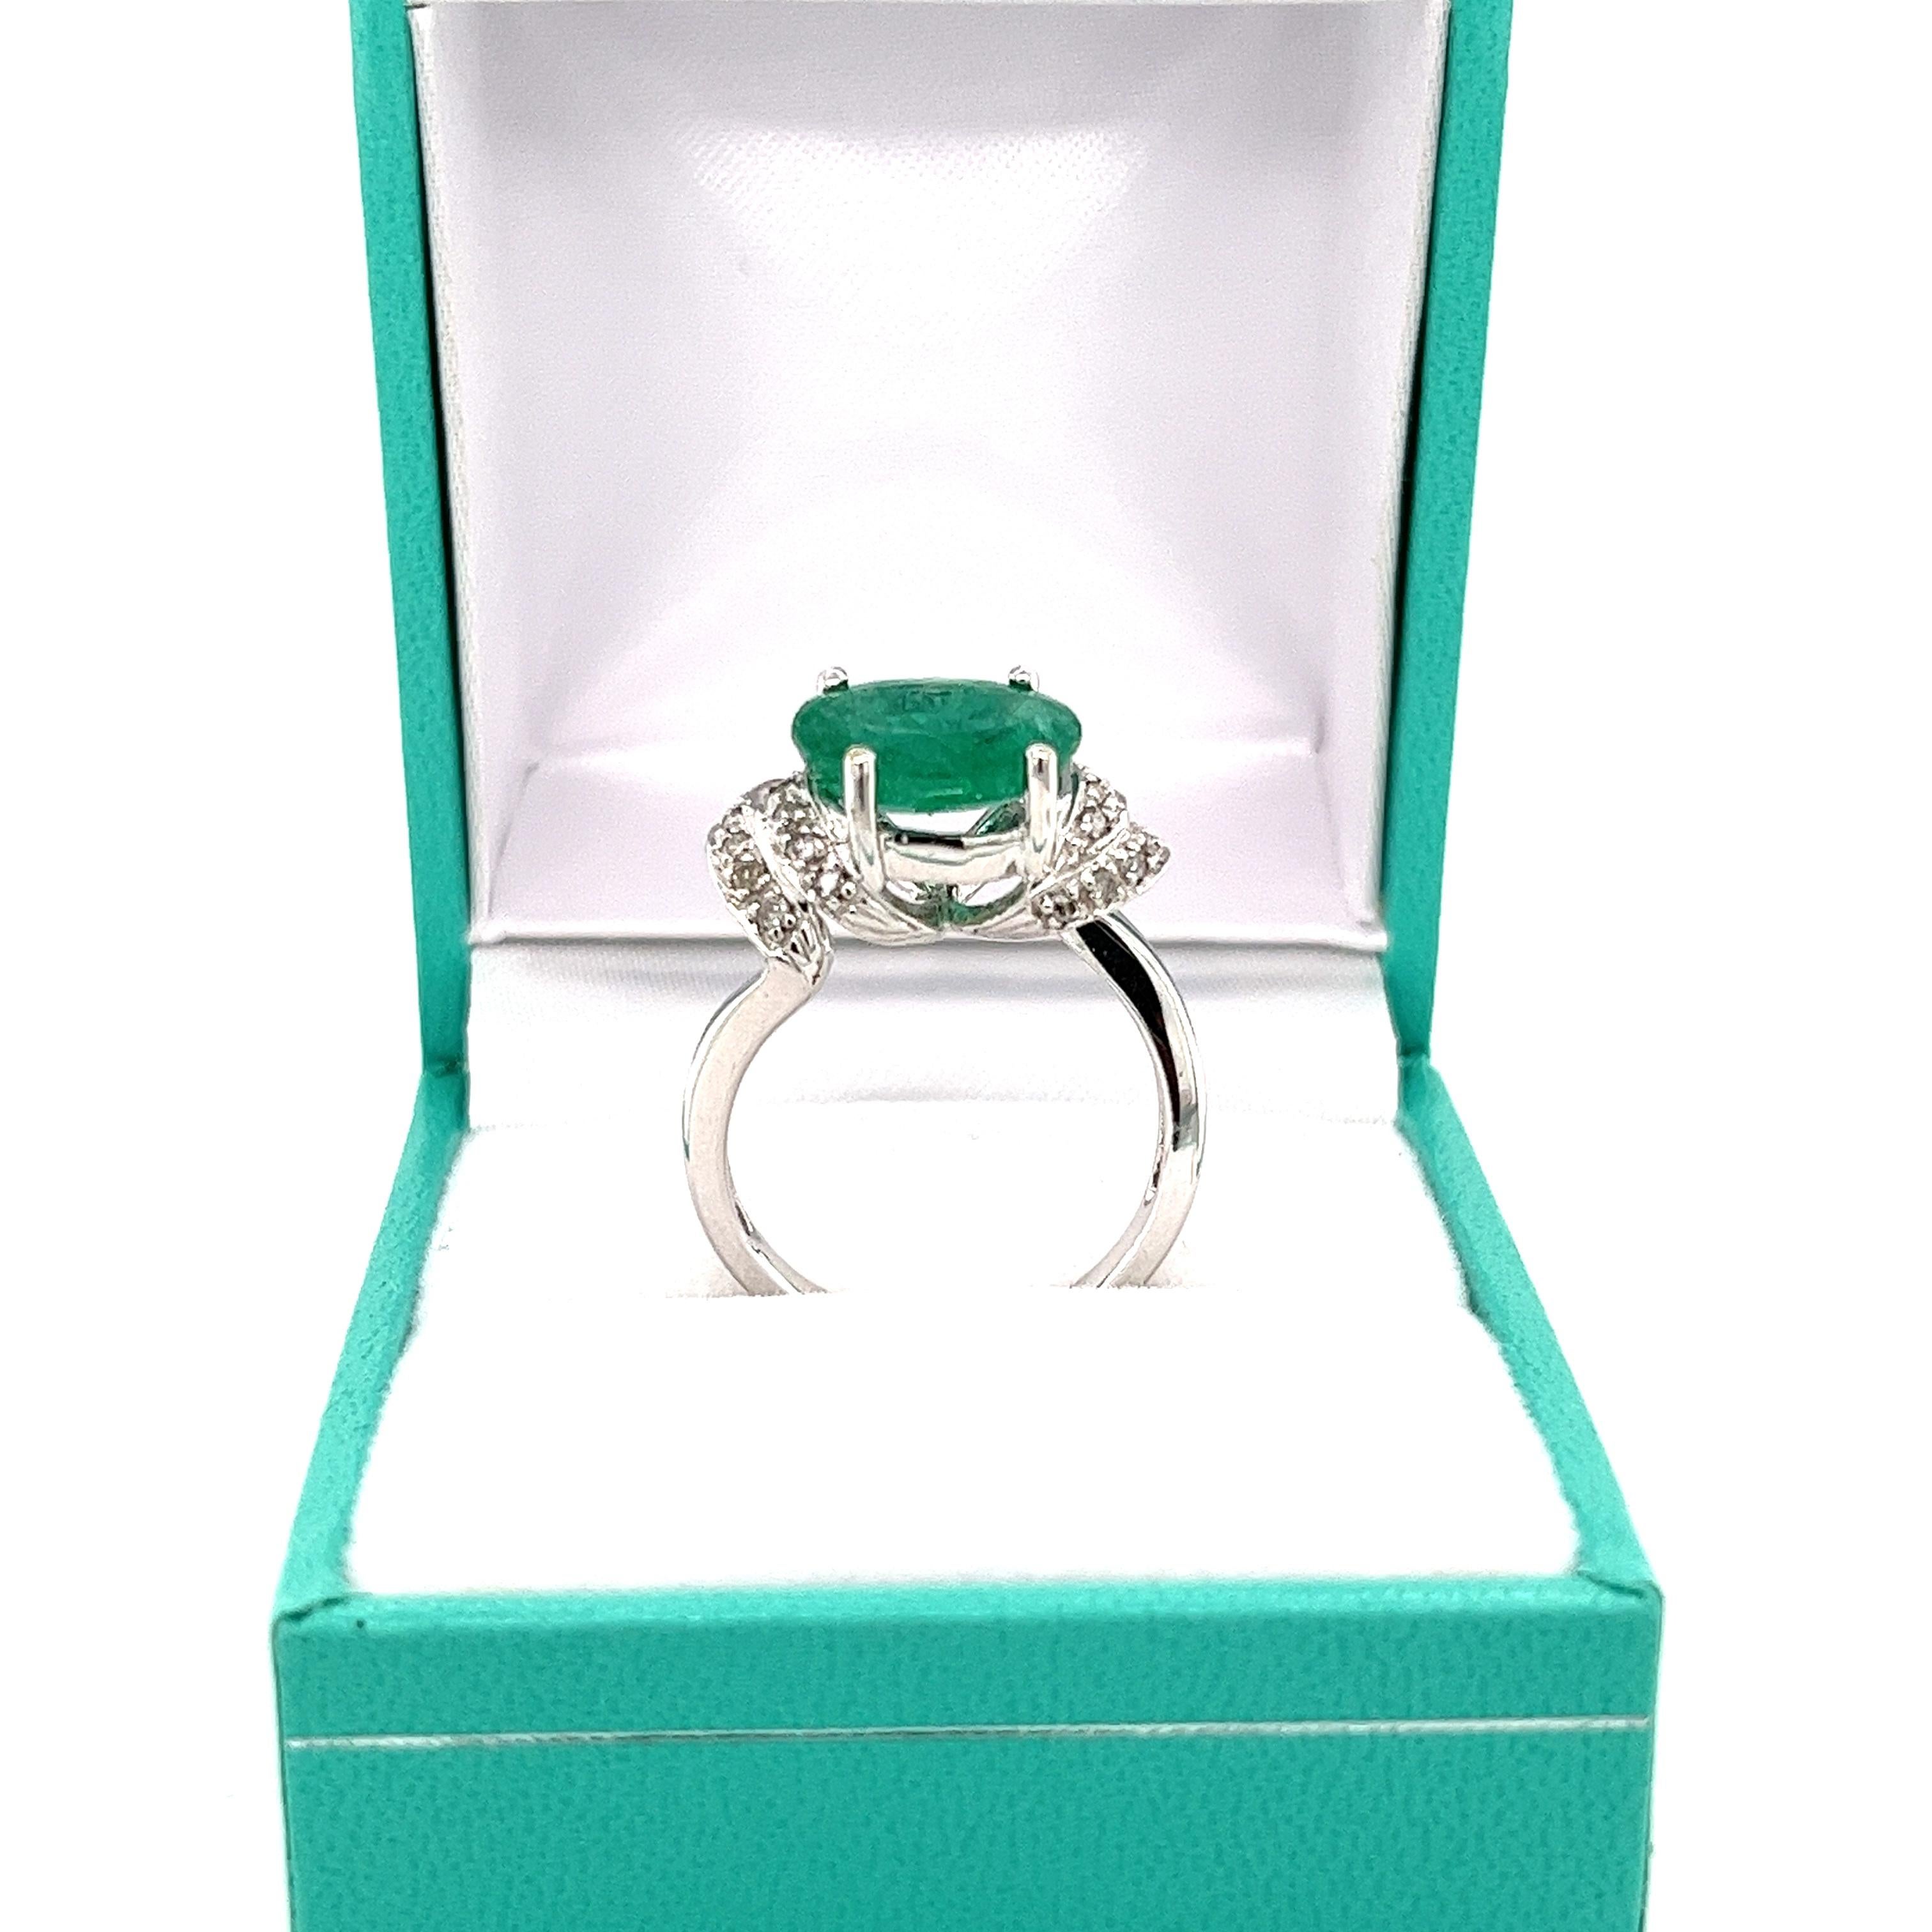 2.37 Carat Oval Cut Colombian Emerald in Retro Curved White Gold 4-Prong Ring  In New Condition For Sale In Miami, FL